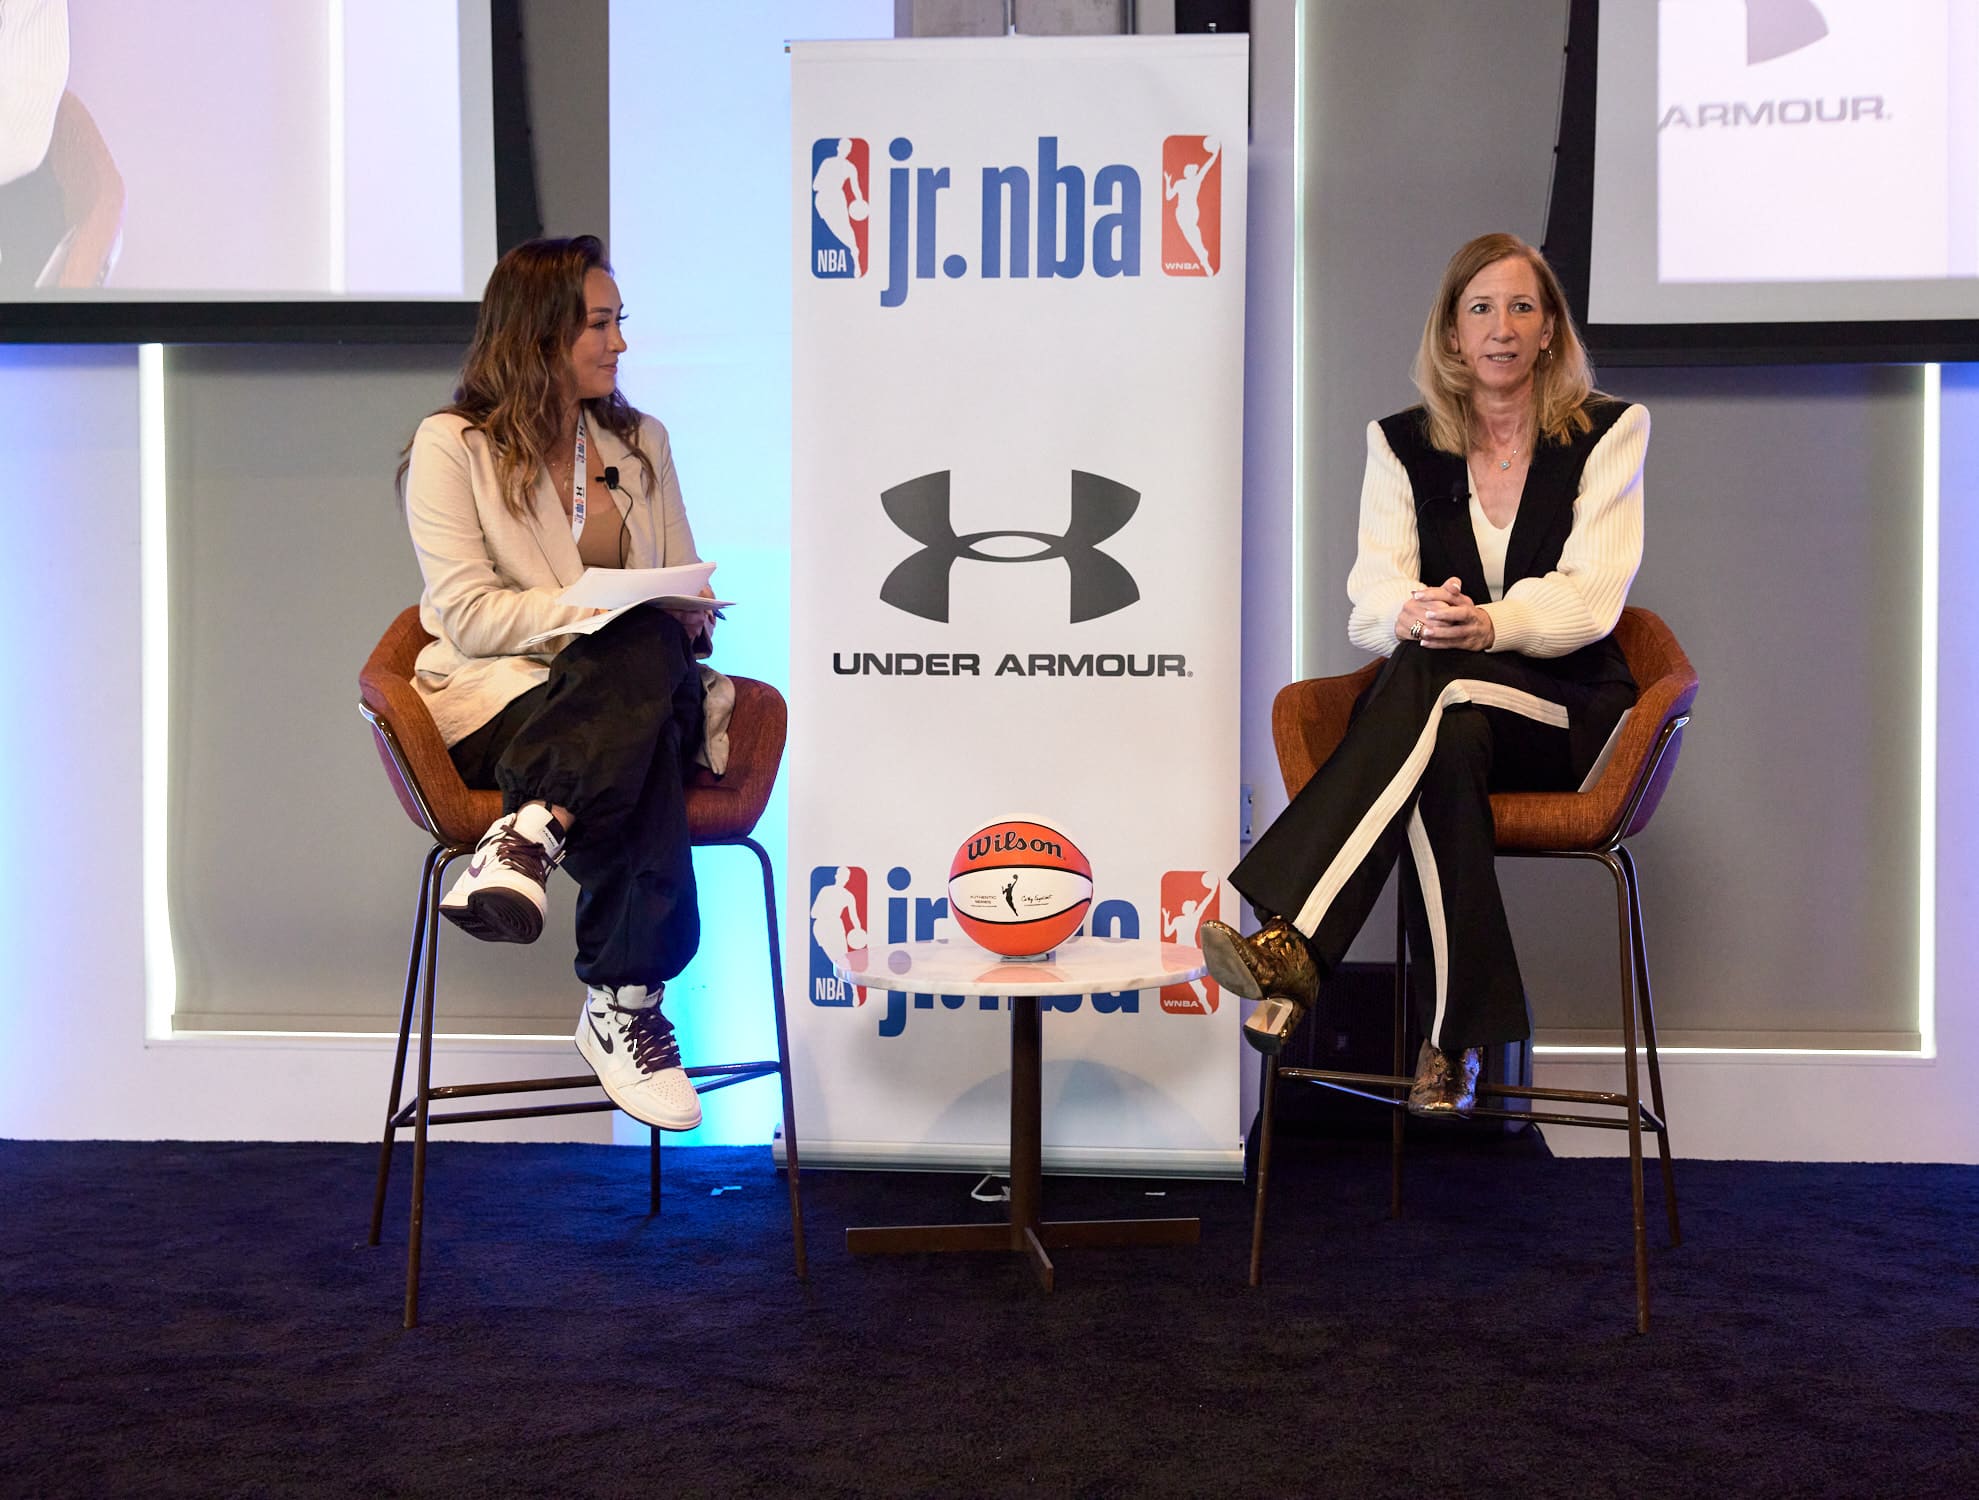 WNBA commissioner Cathy Engelbert attended Wednesday's Jr. NBA event.